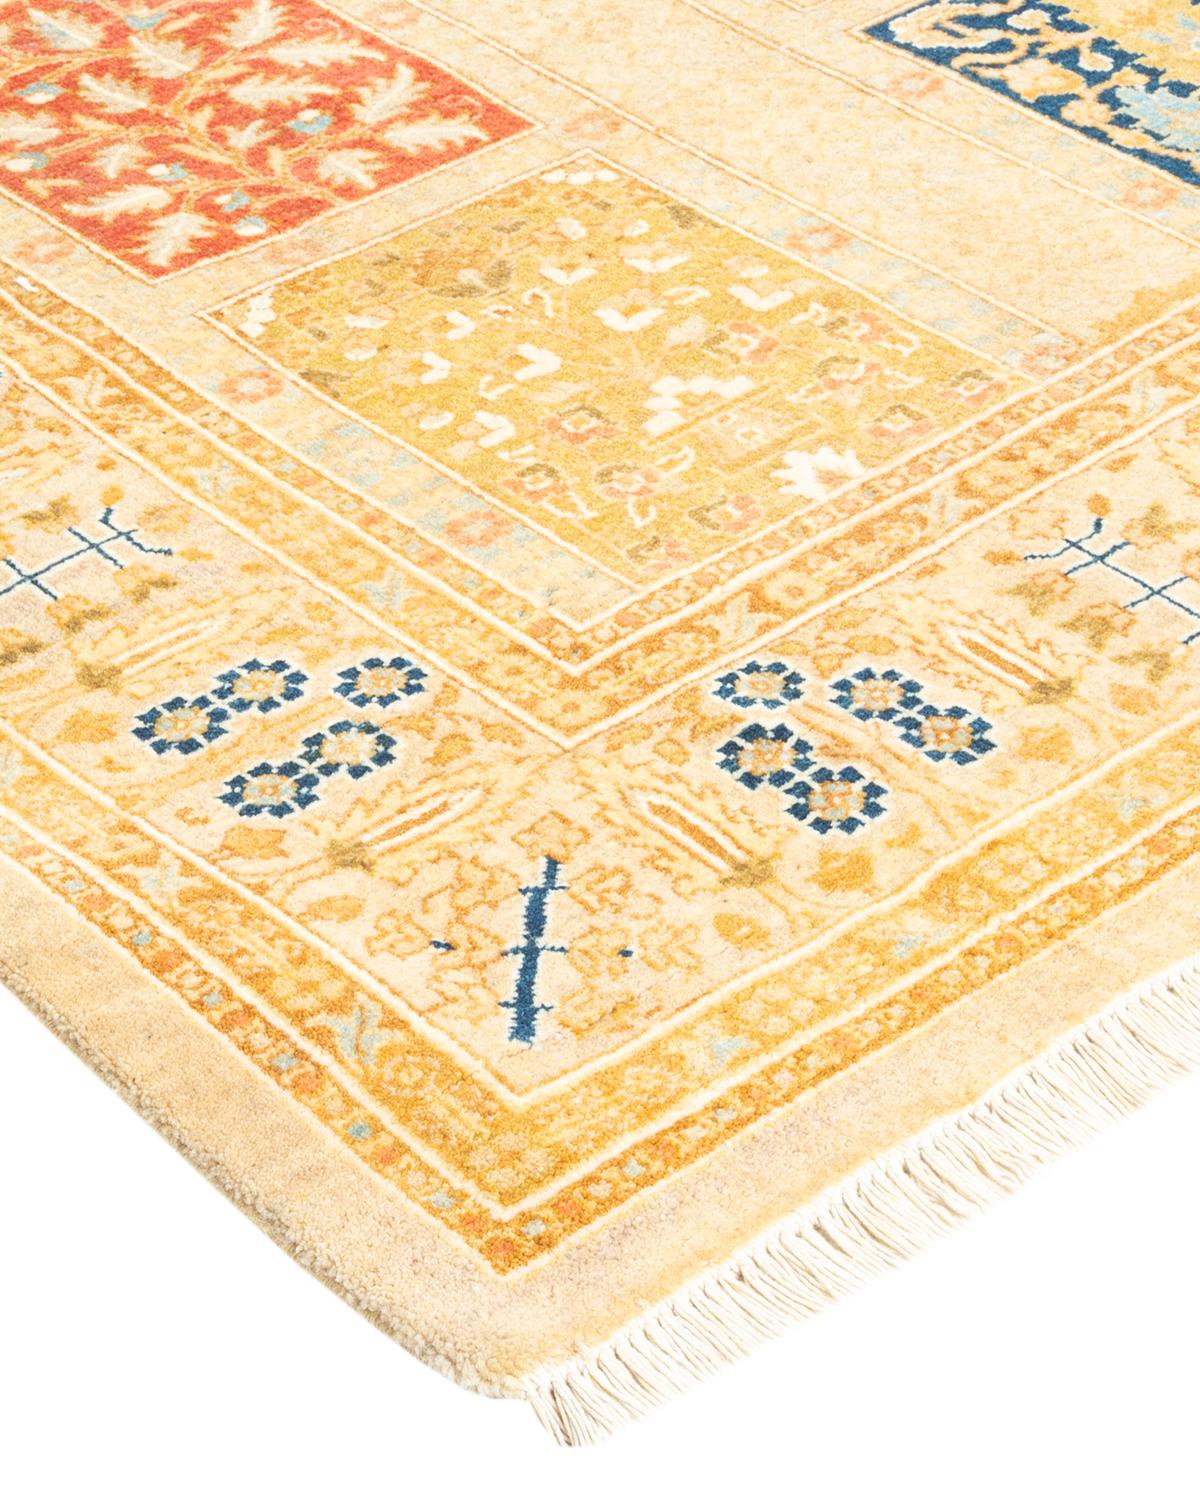 With understated palettes and allover designs, the rugs in the Mogul Collection will bring timeless sophistication to any room. Influenced by a spectrum of Turkish, Indian, and Persian designs, the artisans who handweave these wool rugs imbue